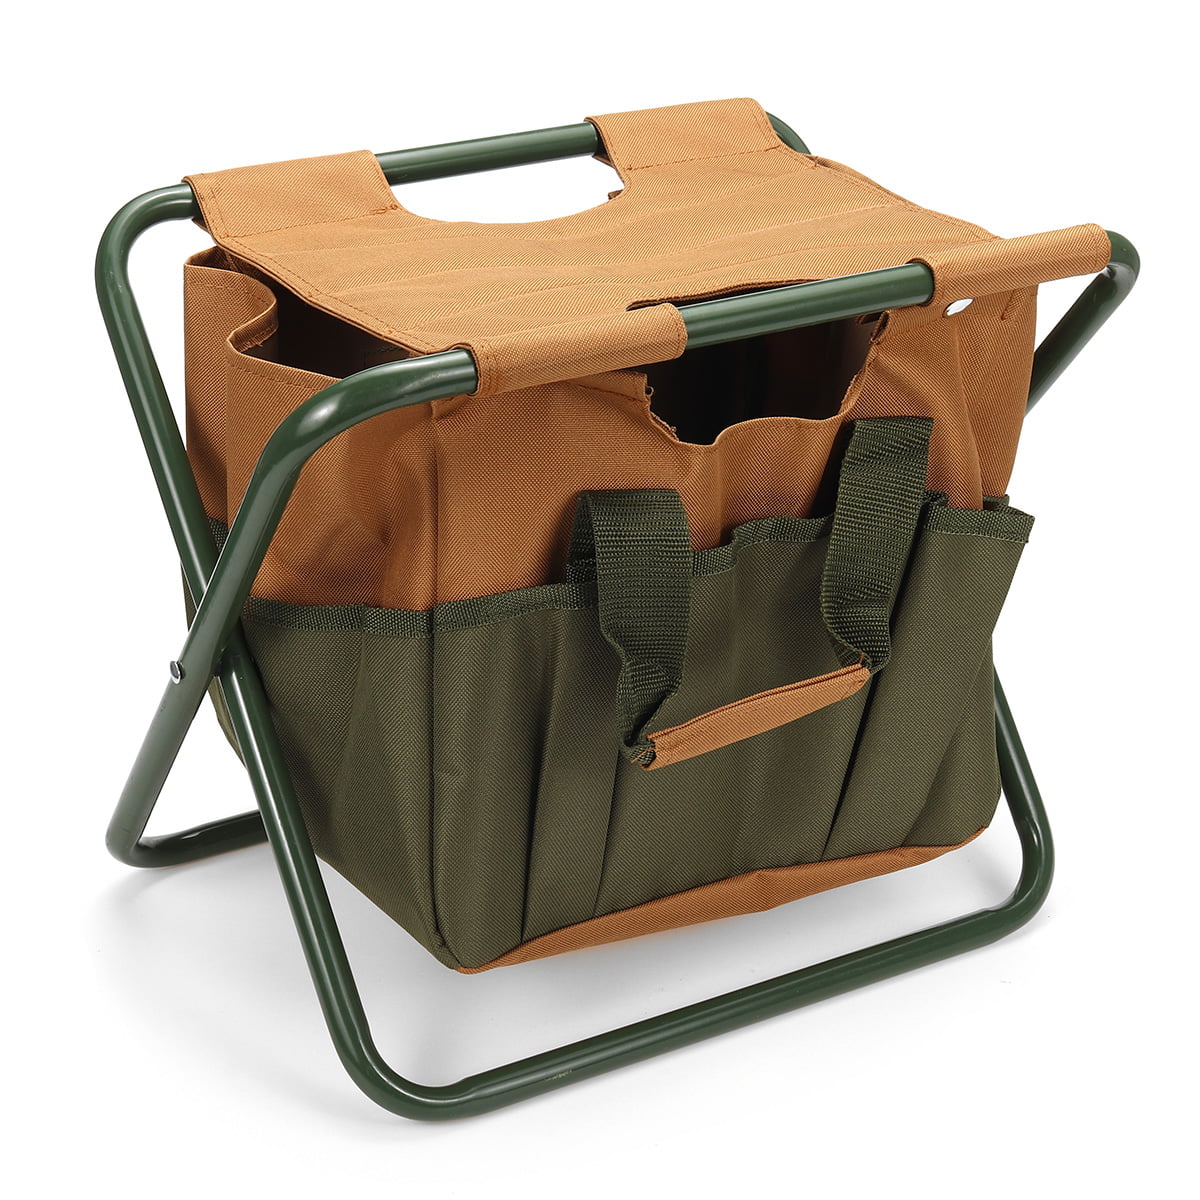 Folding Garden Stool with Detachable Gardener Tool Bag Fordable Small Multiple Purpose Chair Great for Fishing Outdoor Sports Gift